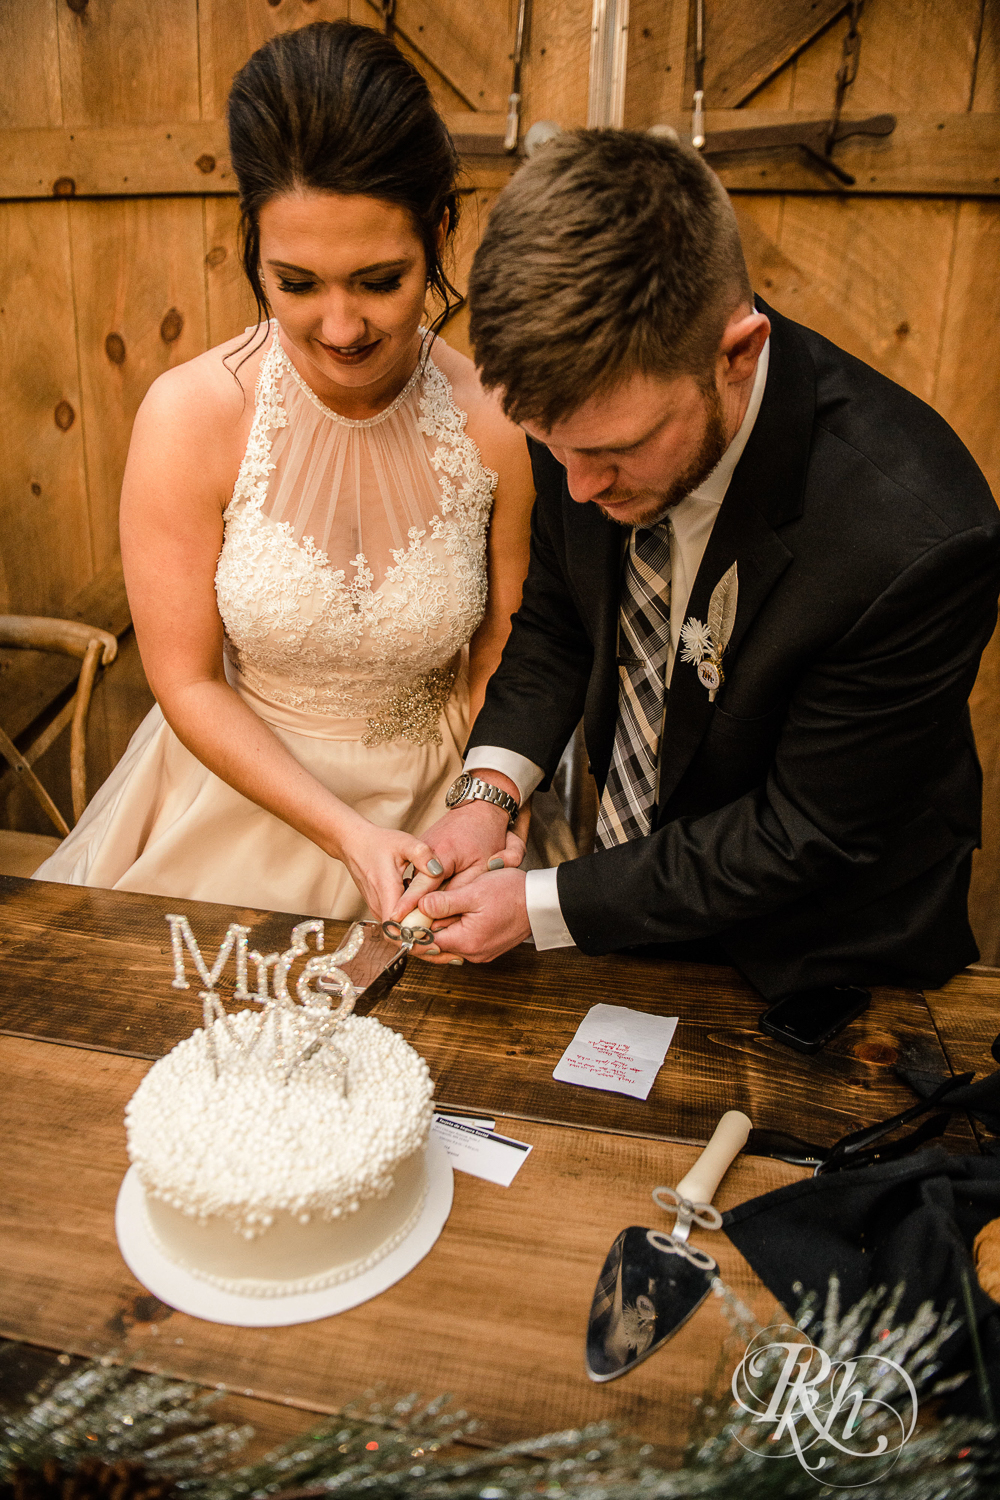 Bride and groom cut wedding cake during reception at Creekside Farm in Rush City, Minnesota.